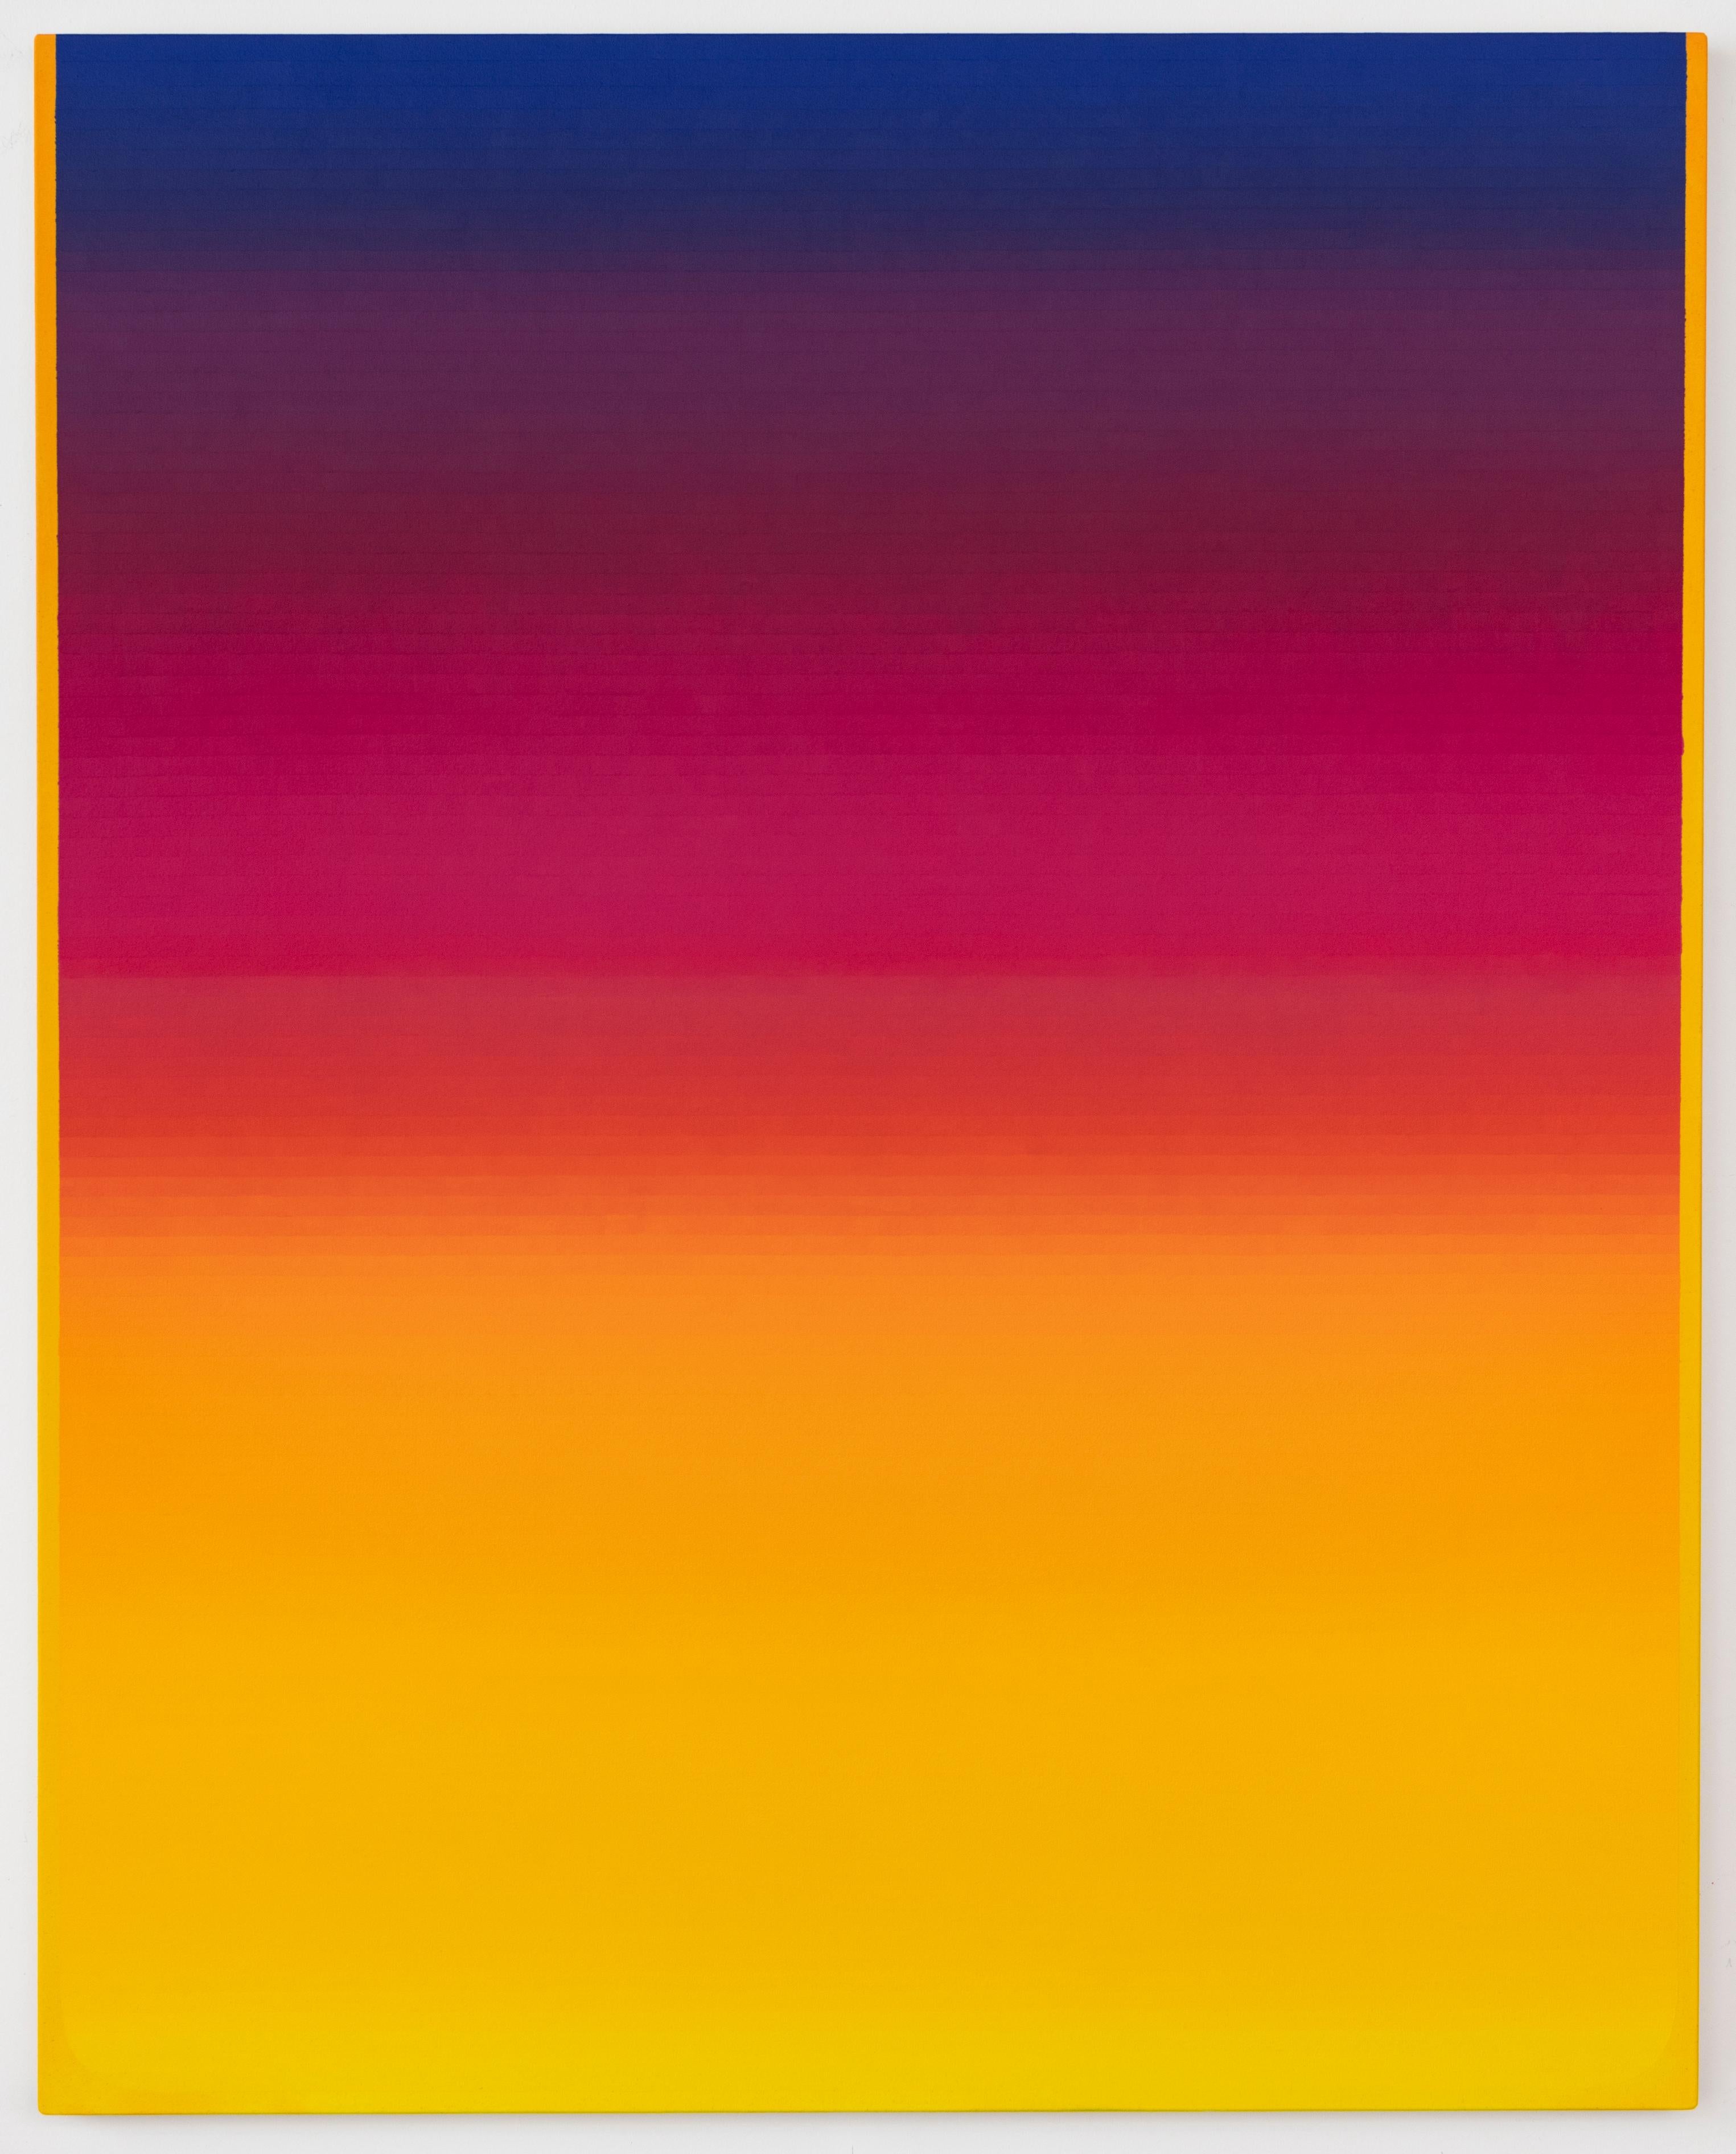 Audrey Stone Abstract Painting - Rome Five, Hot Pink, Navy Cobalt Blue, Orange, Golden Yellow Gradient Stripes